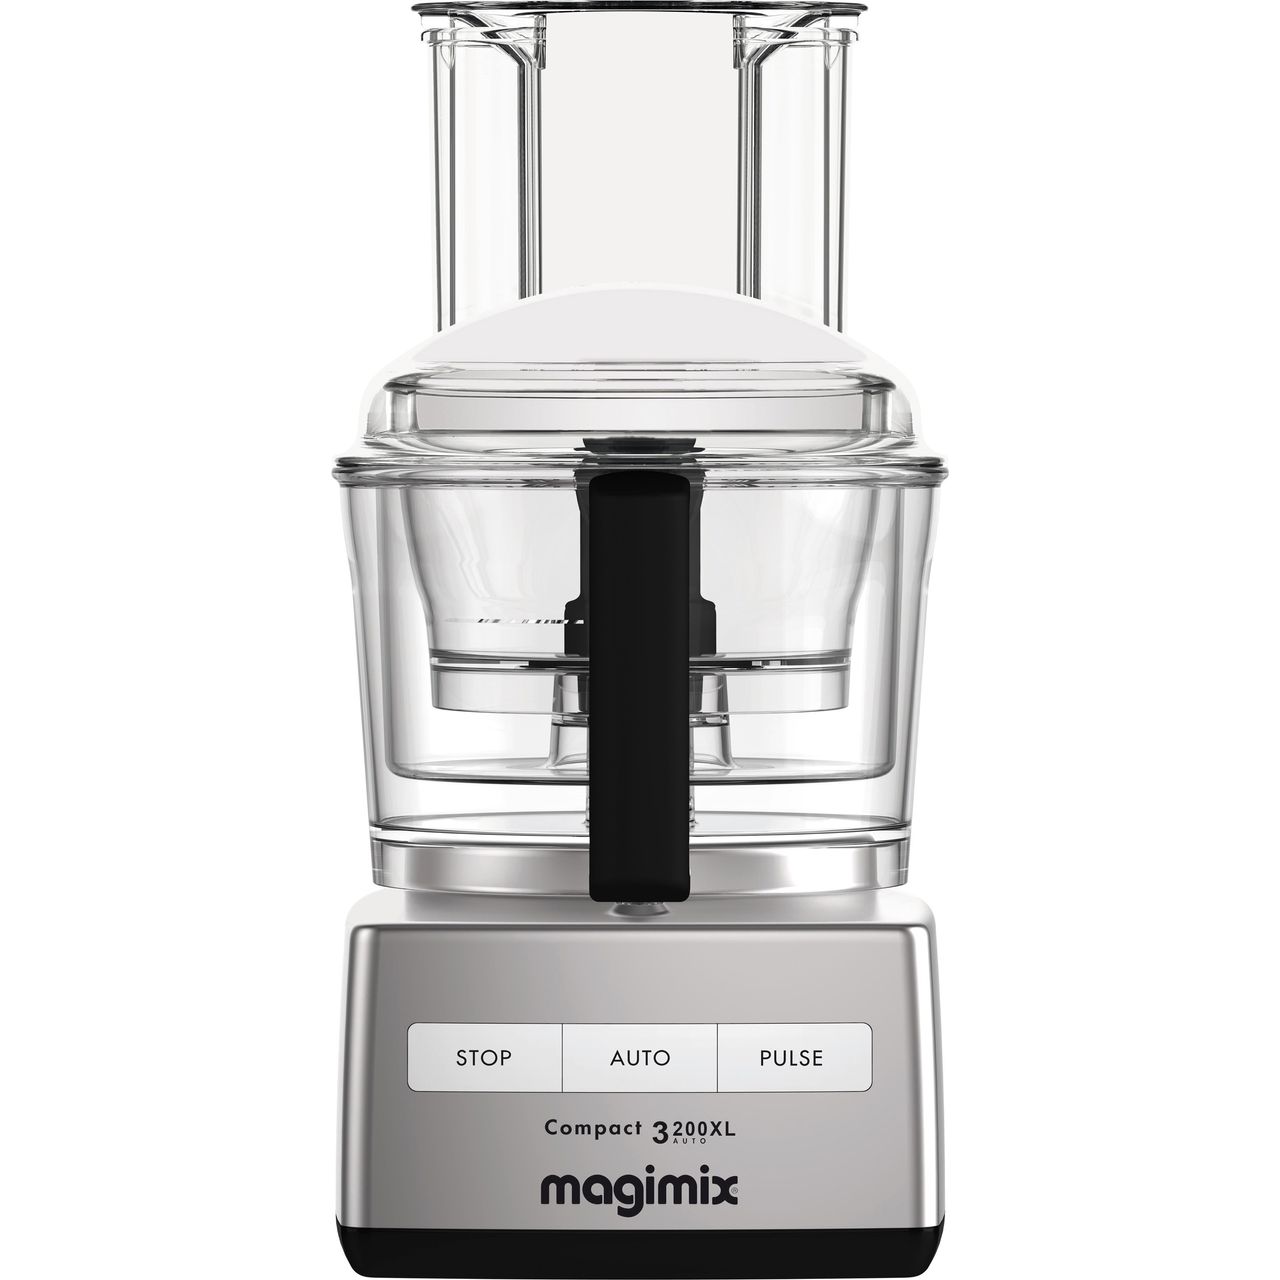 Magimix 3200XL 18361 2.6 Litre Food Processor With 12 Accessories Review